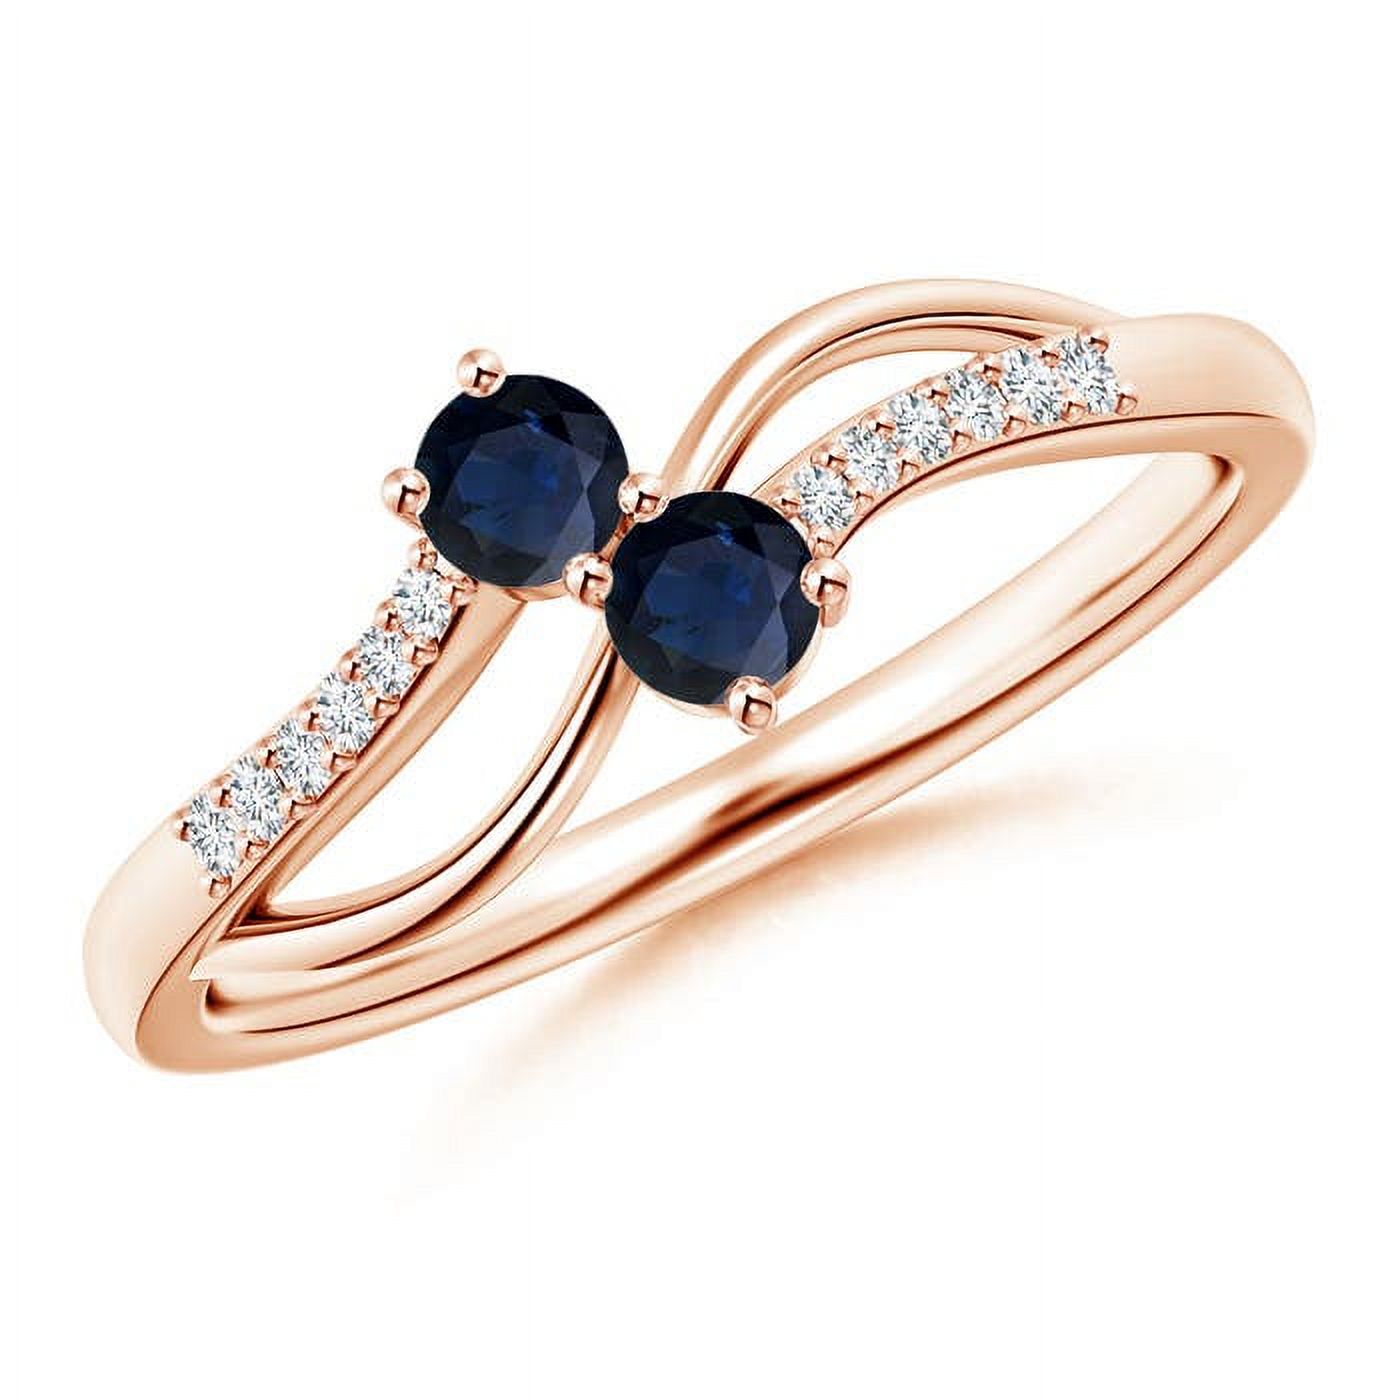 Angara Natural 0.28 Ct. Blue Sapphire with Diamond Side Stone Ring in 14K Rose Gold for Women (Ring Size: 7) - image 1 of 8